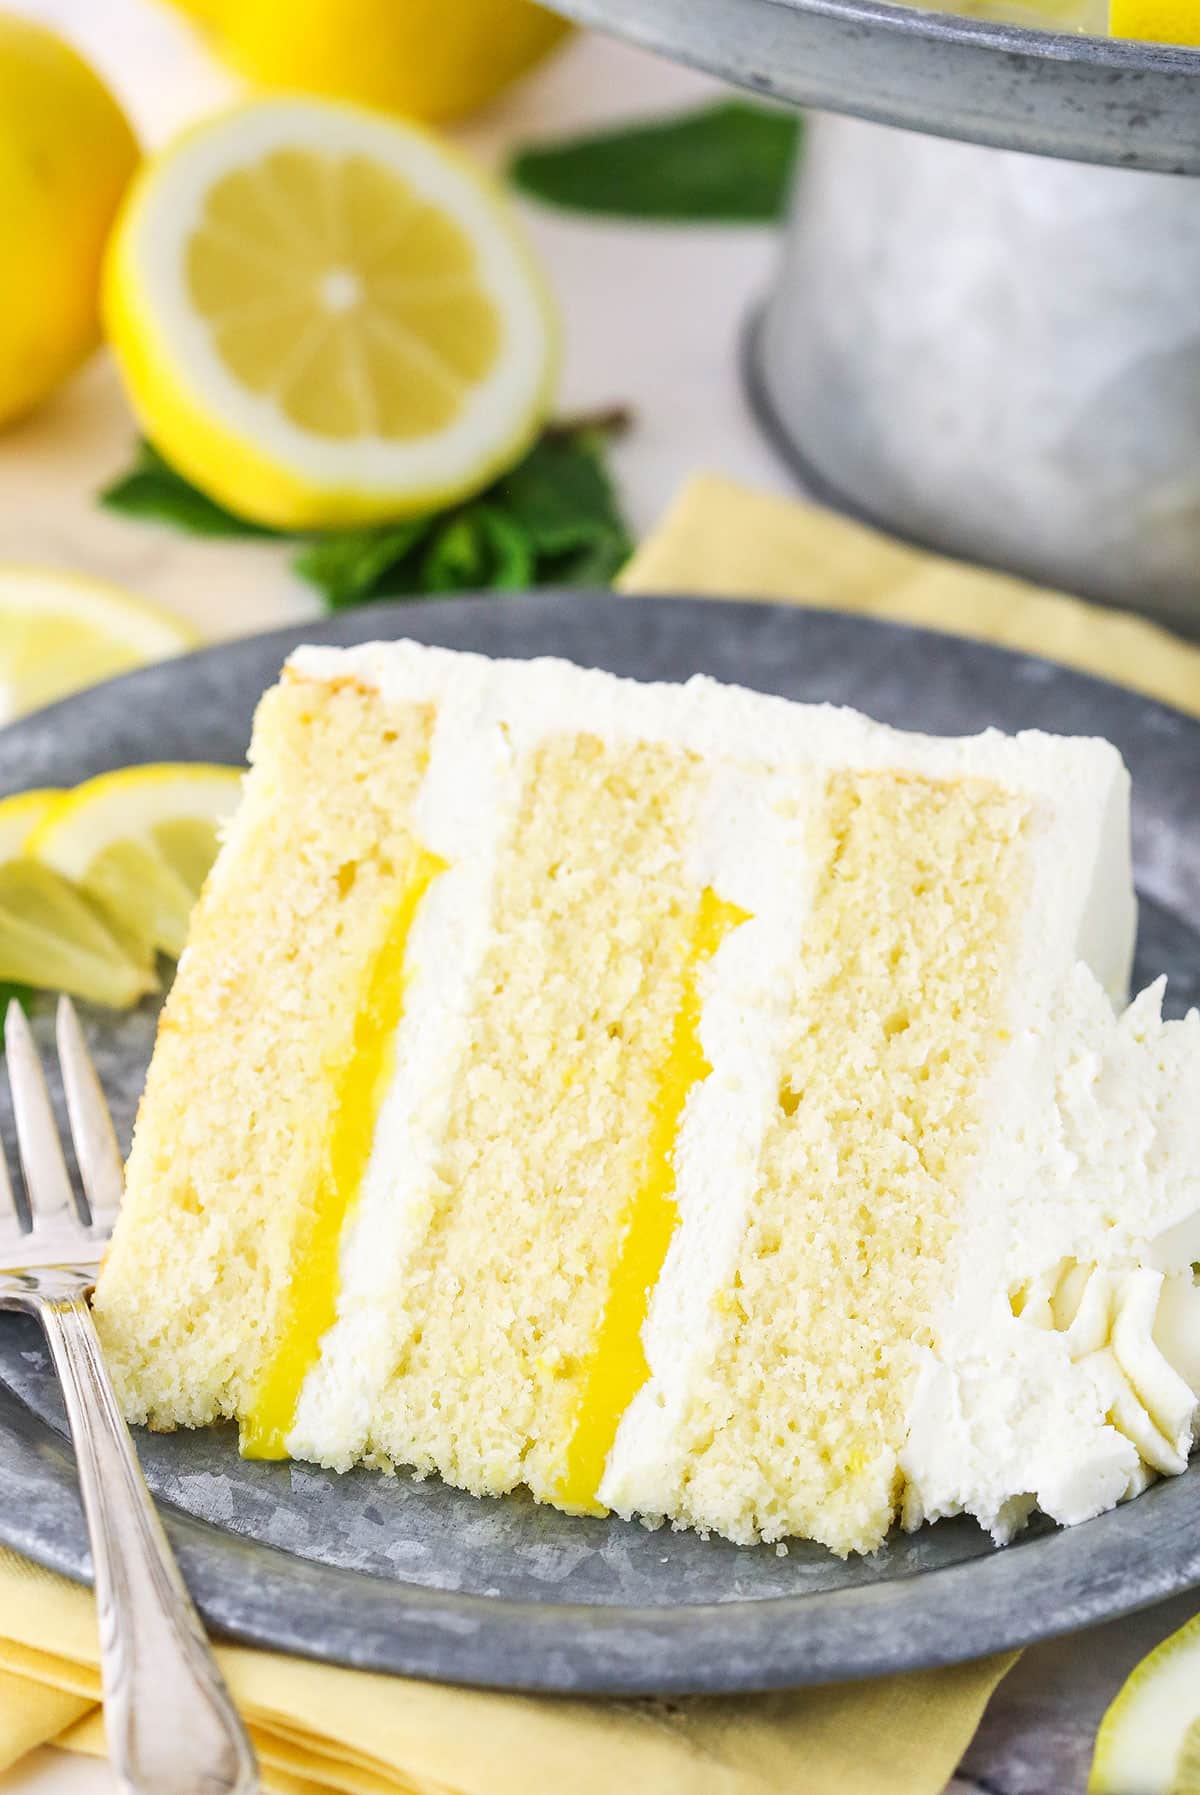 A slice of Lemon Mascarpone Layer Cake on a metal colored plate with a fork and cut lemons in the background